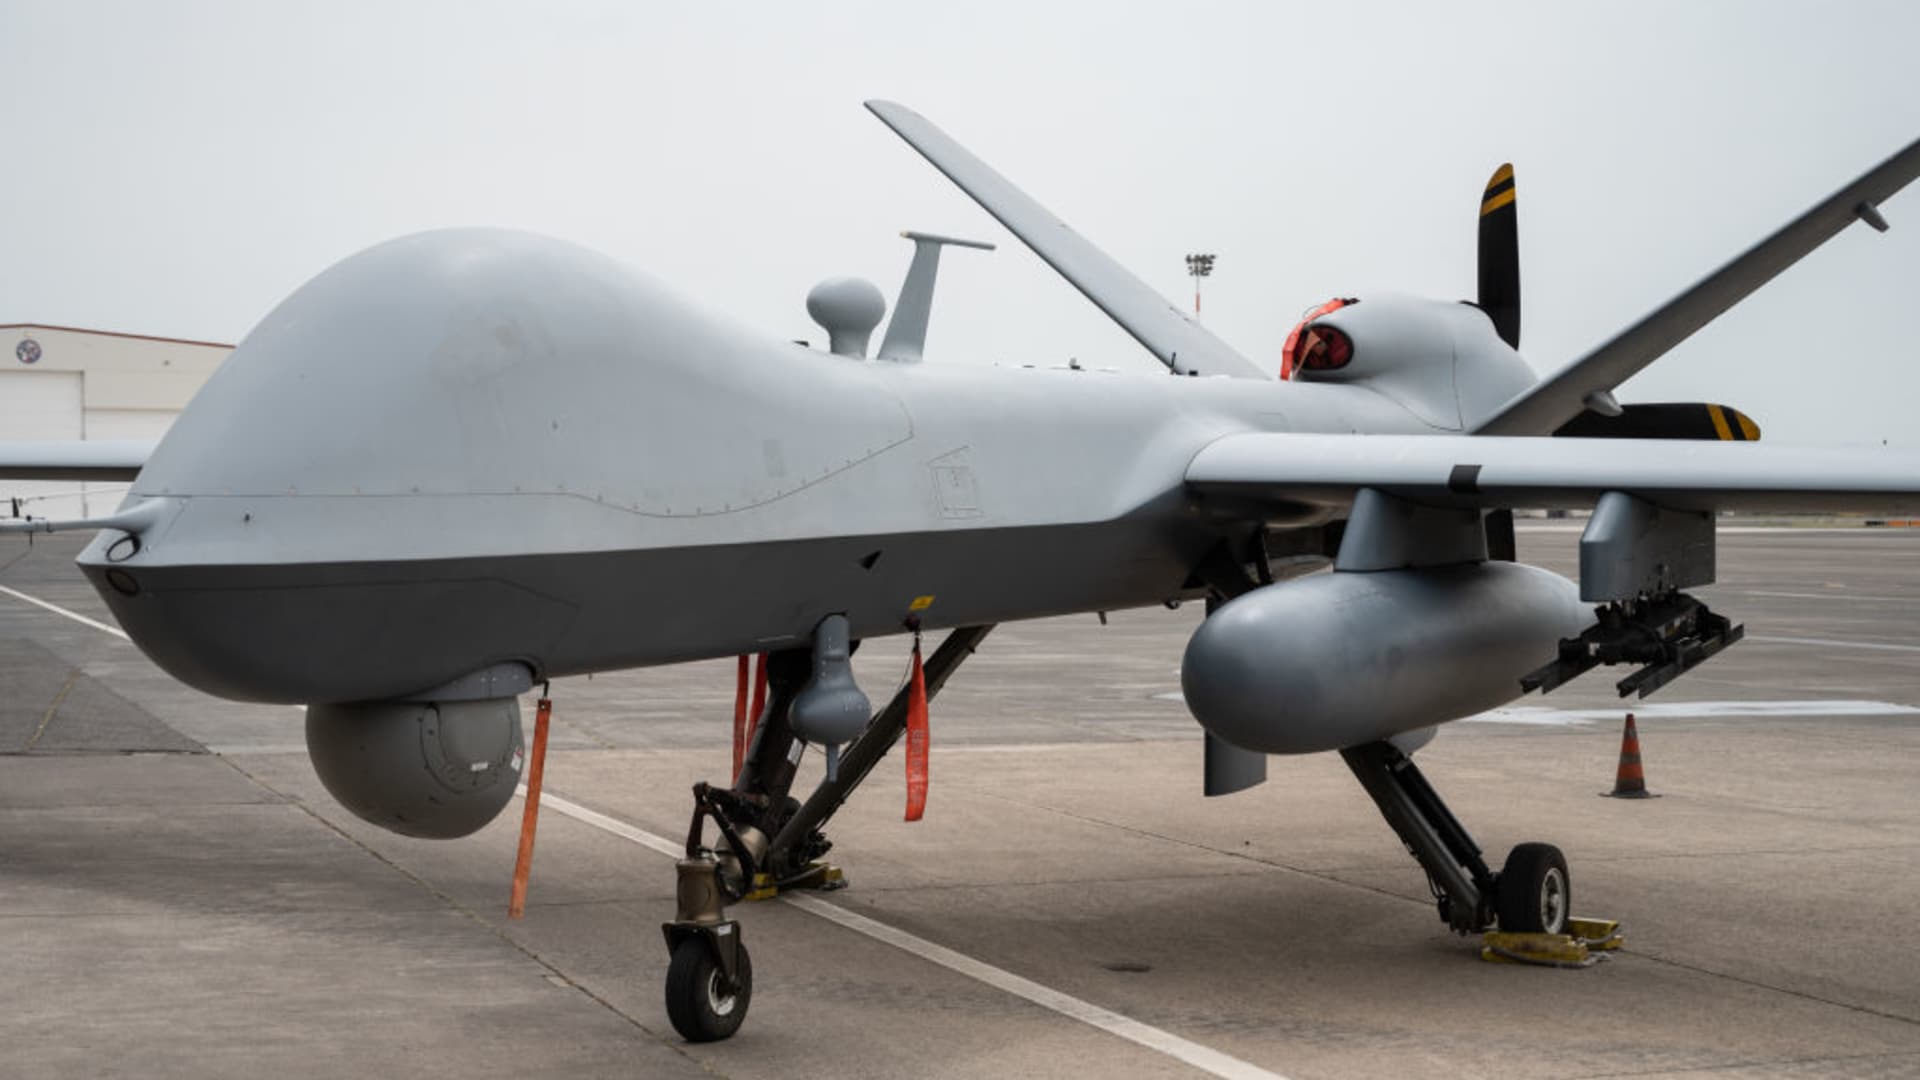 An Mq-9 Reaper type drone at the Naval Air Station at Sigonella, Sicily, the best equipped American intervention base in the Mediterranean on April 29, 2022 in Catania, Italy.